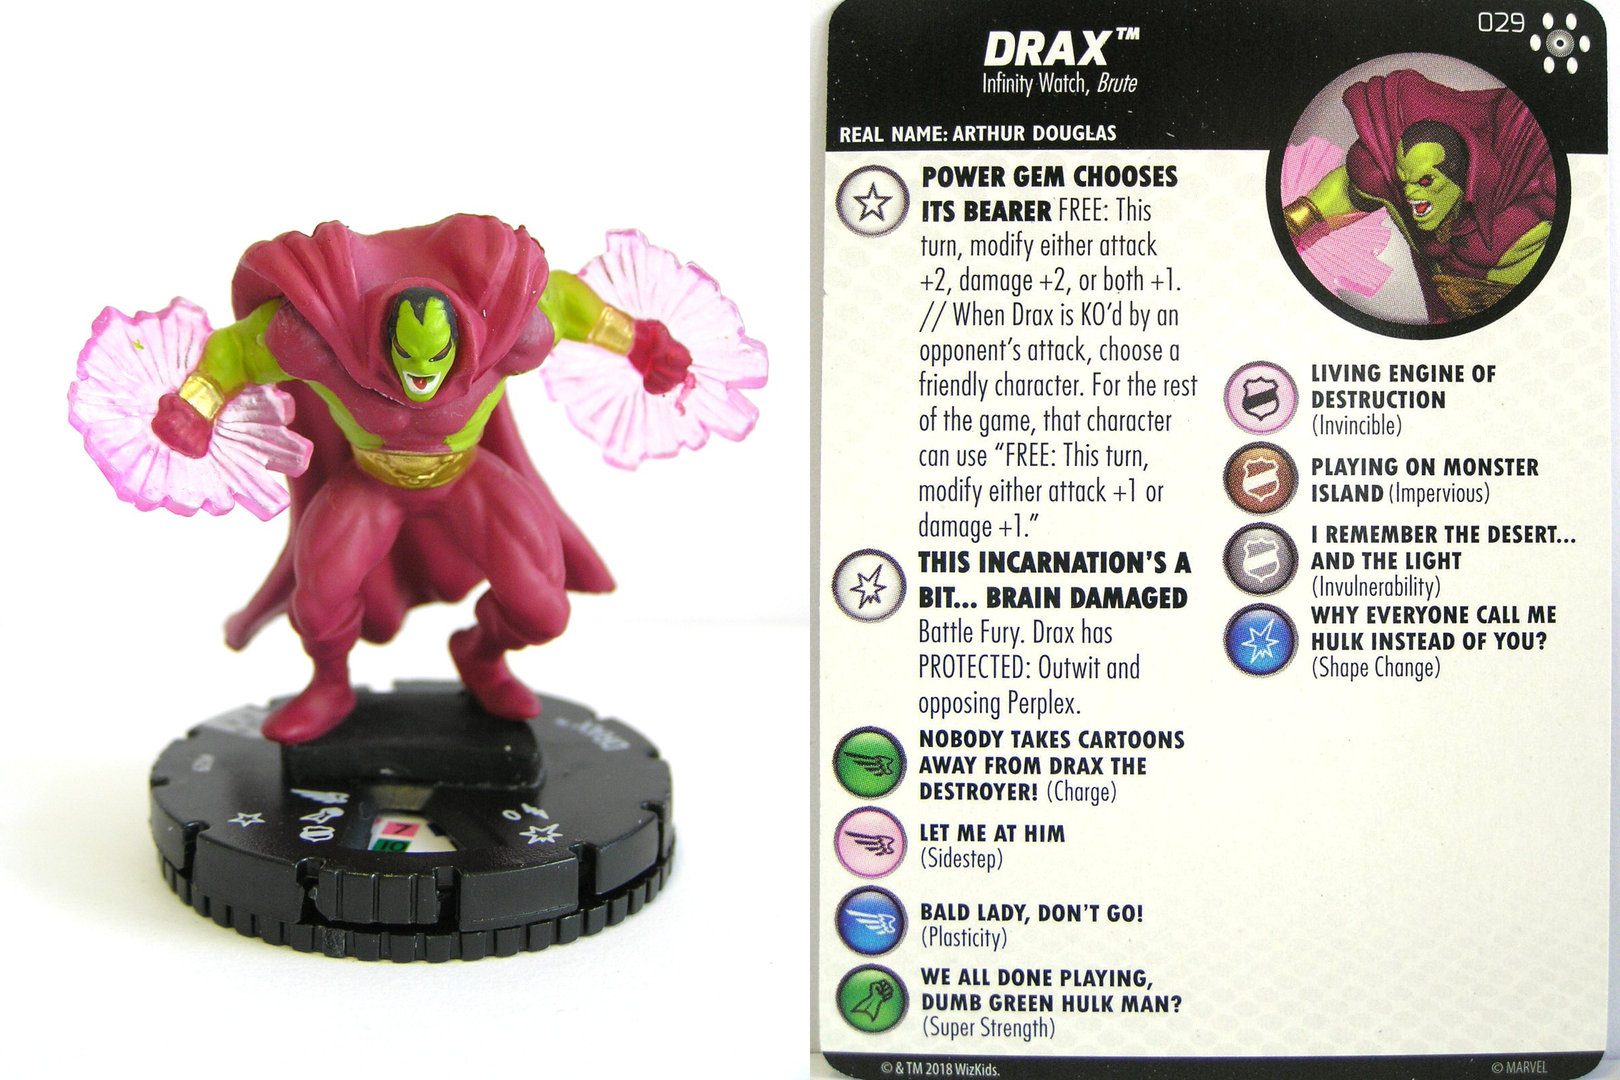 DRAX THE DESTROYER #202 Guardians of the Galaxy Marvel HeroClix Gravity Feed 